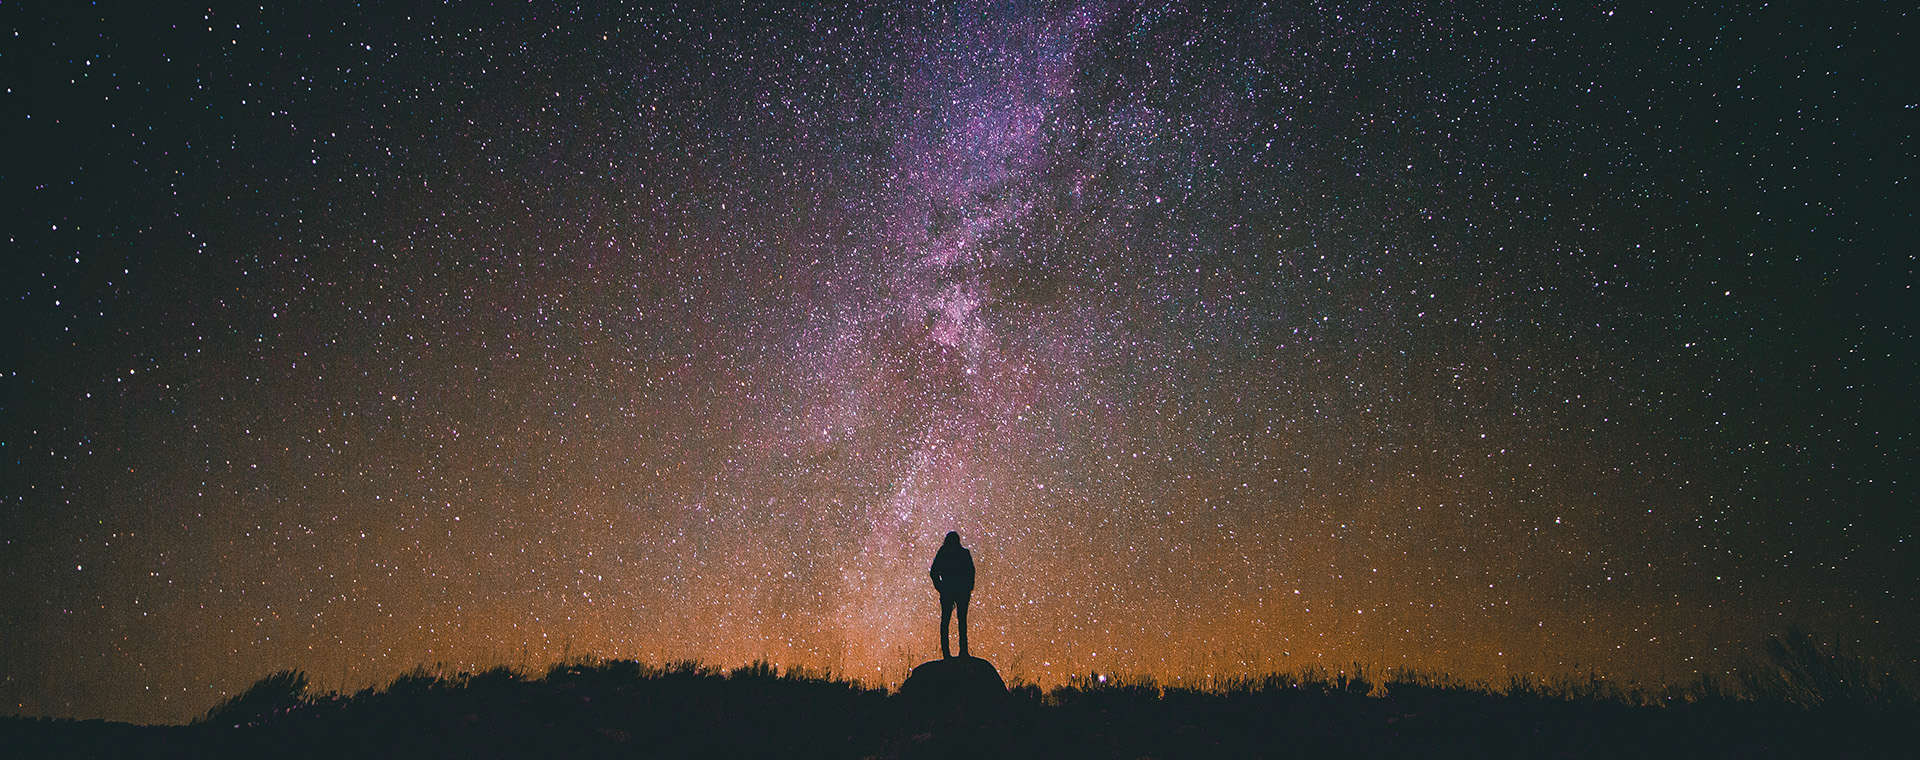 Wide shot of person standing on hill in the dark with stars in the sky